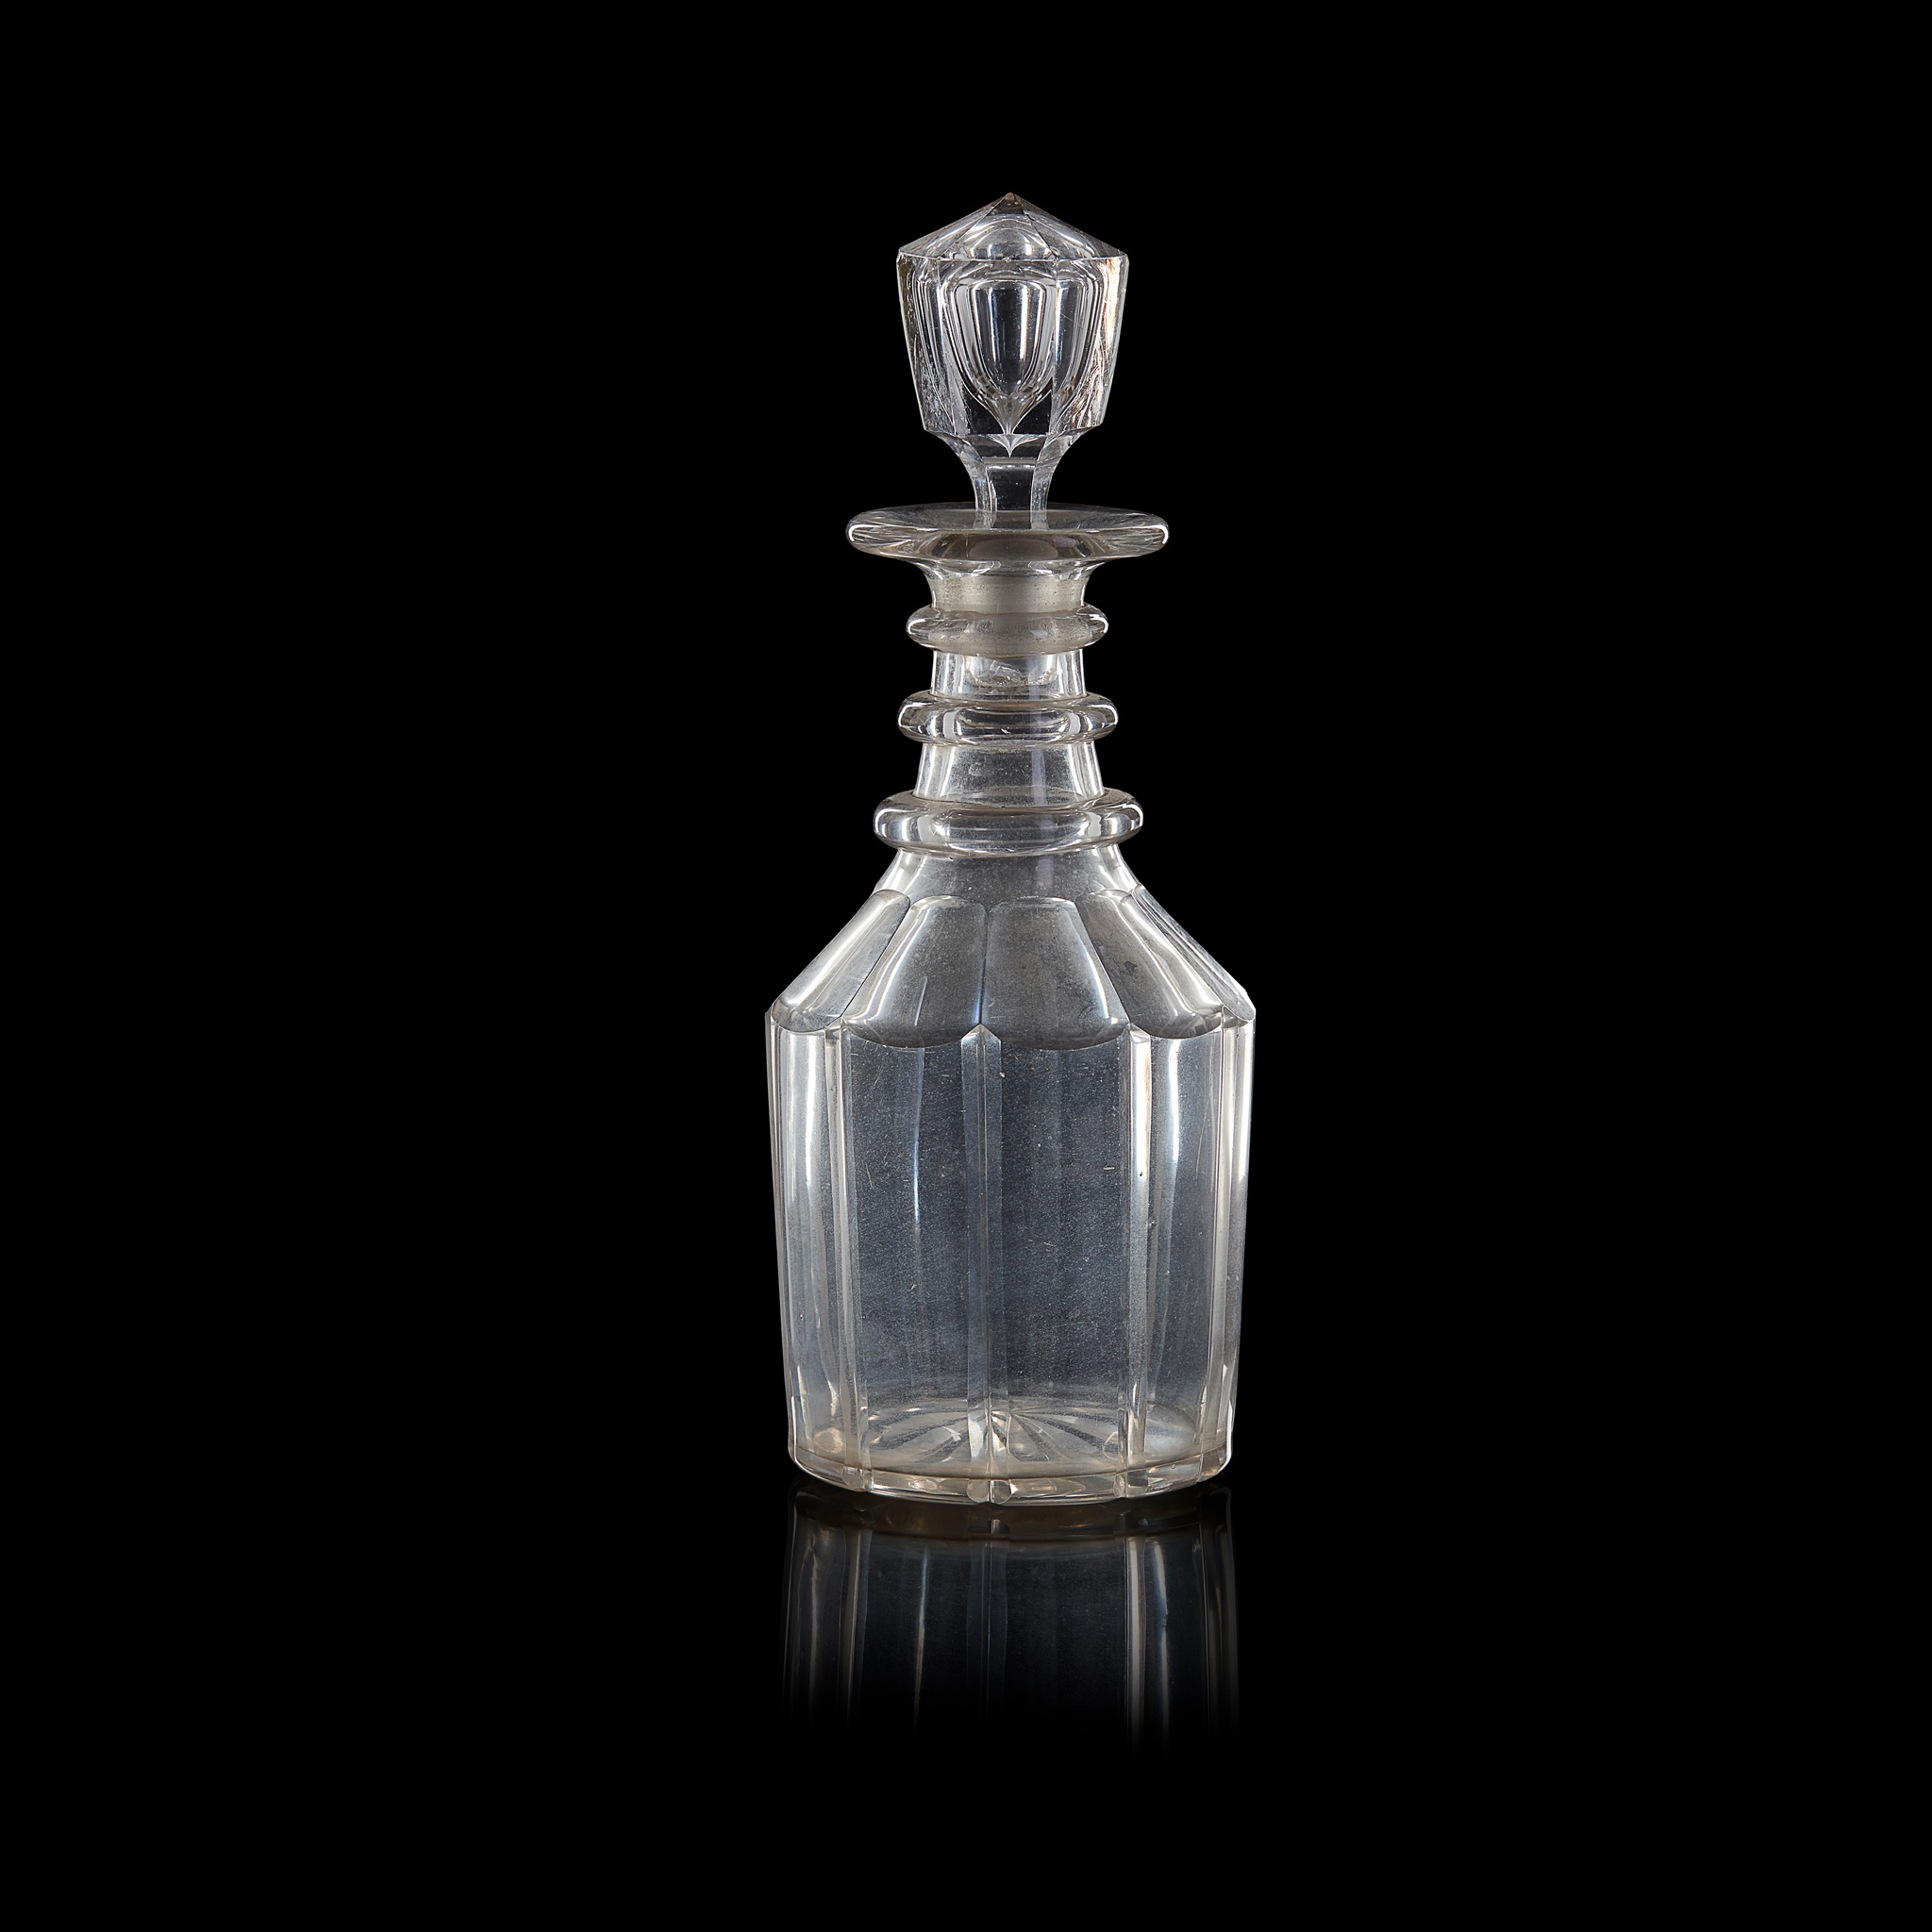 TWO PAIRS OF GLASS DECANTERS EARLY 19TH CENTURY - Image 4 of 4